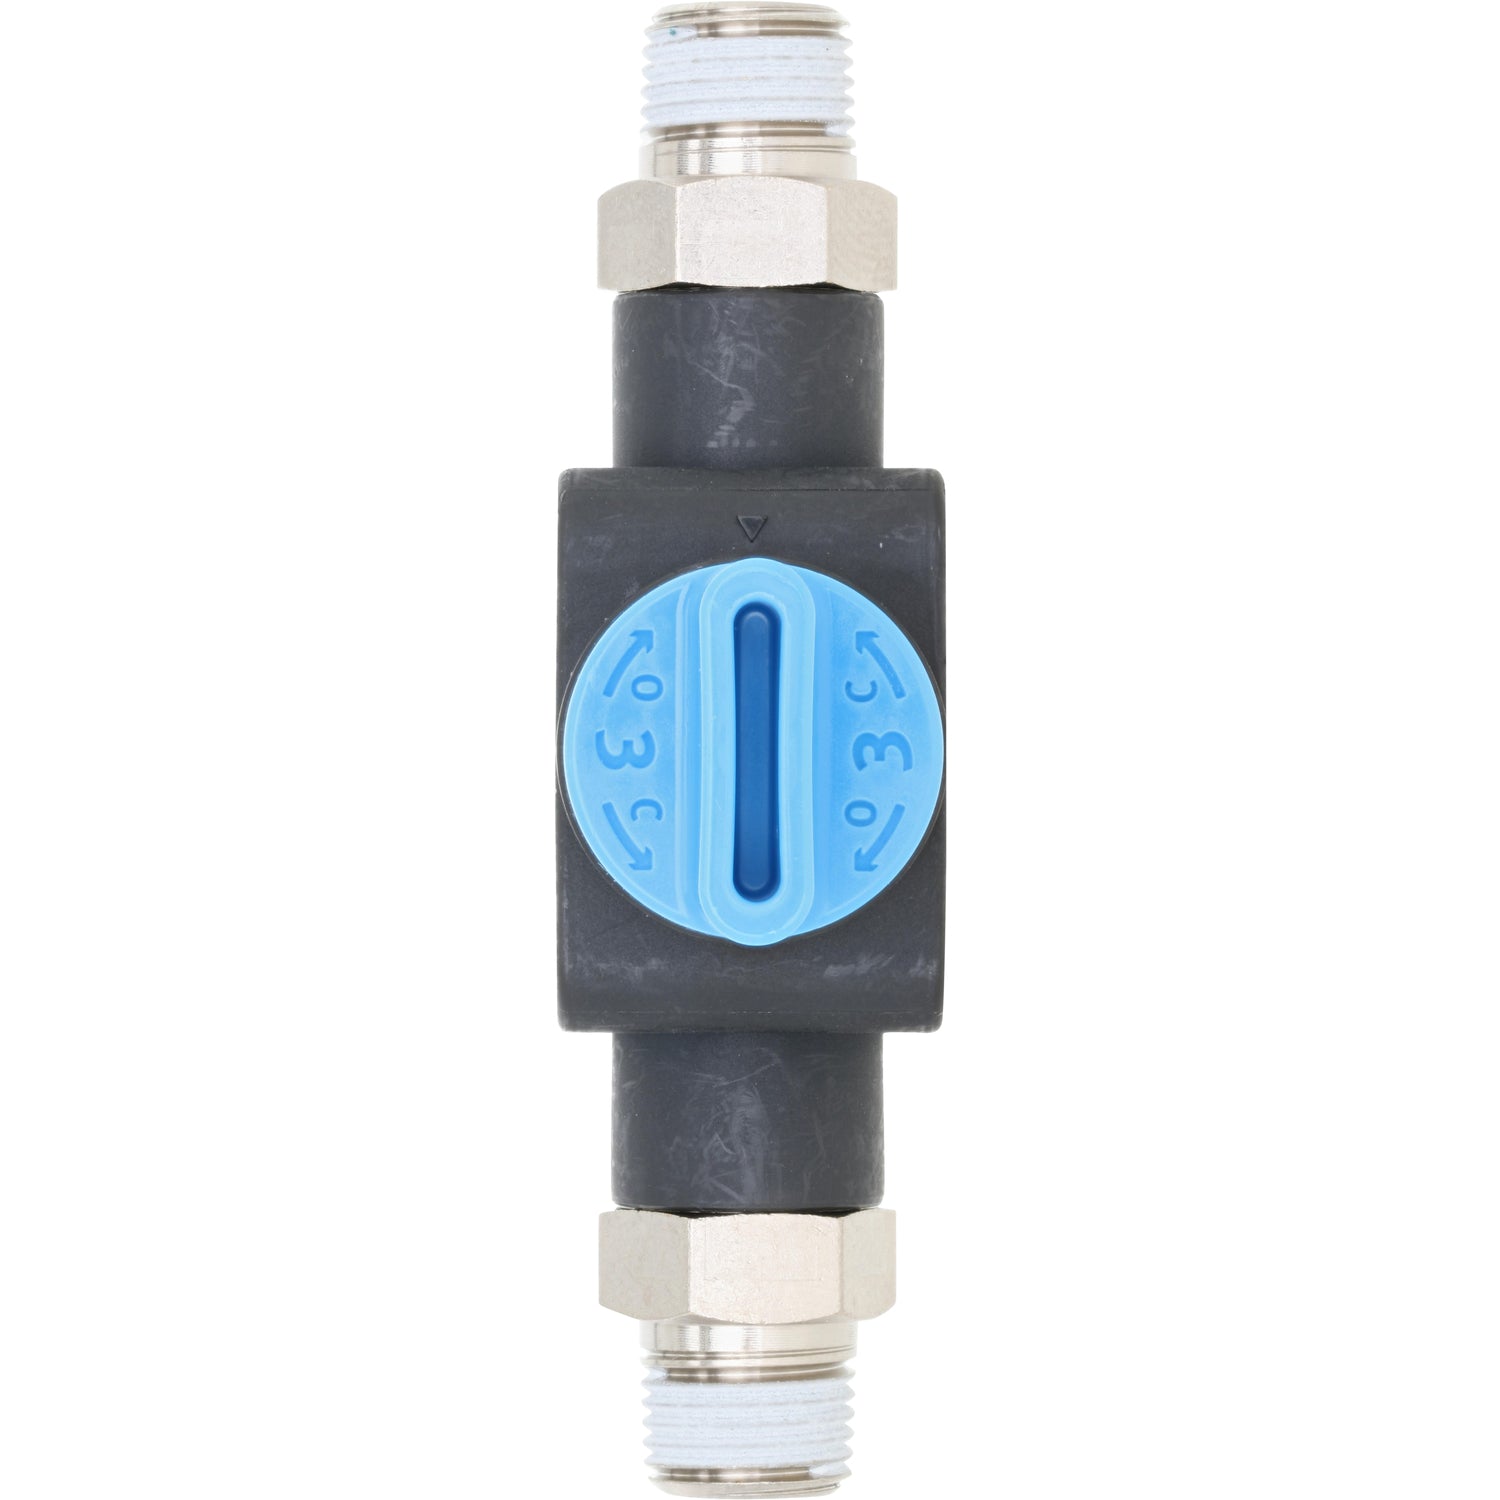 black plastic shut off valve with blue switch and threaded ends. Part shown on white background. 